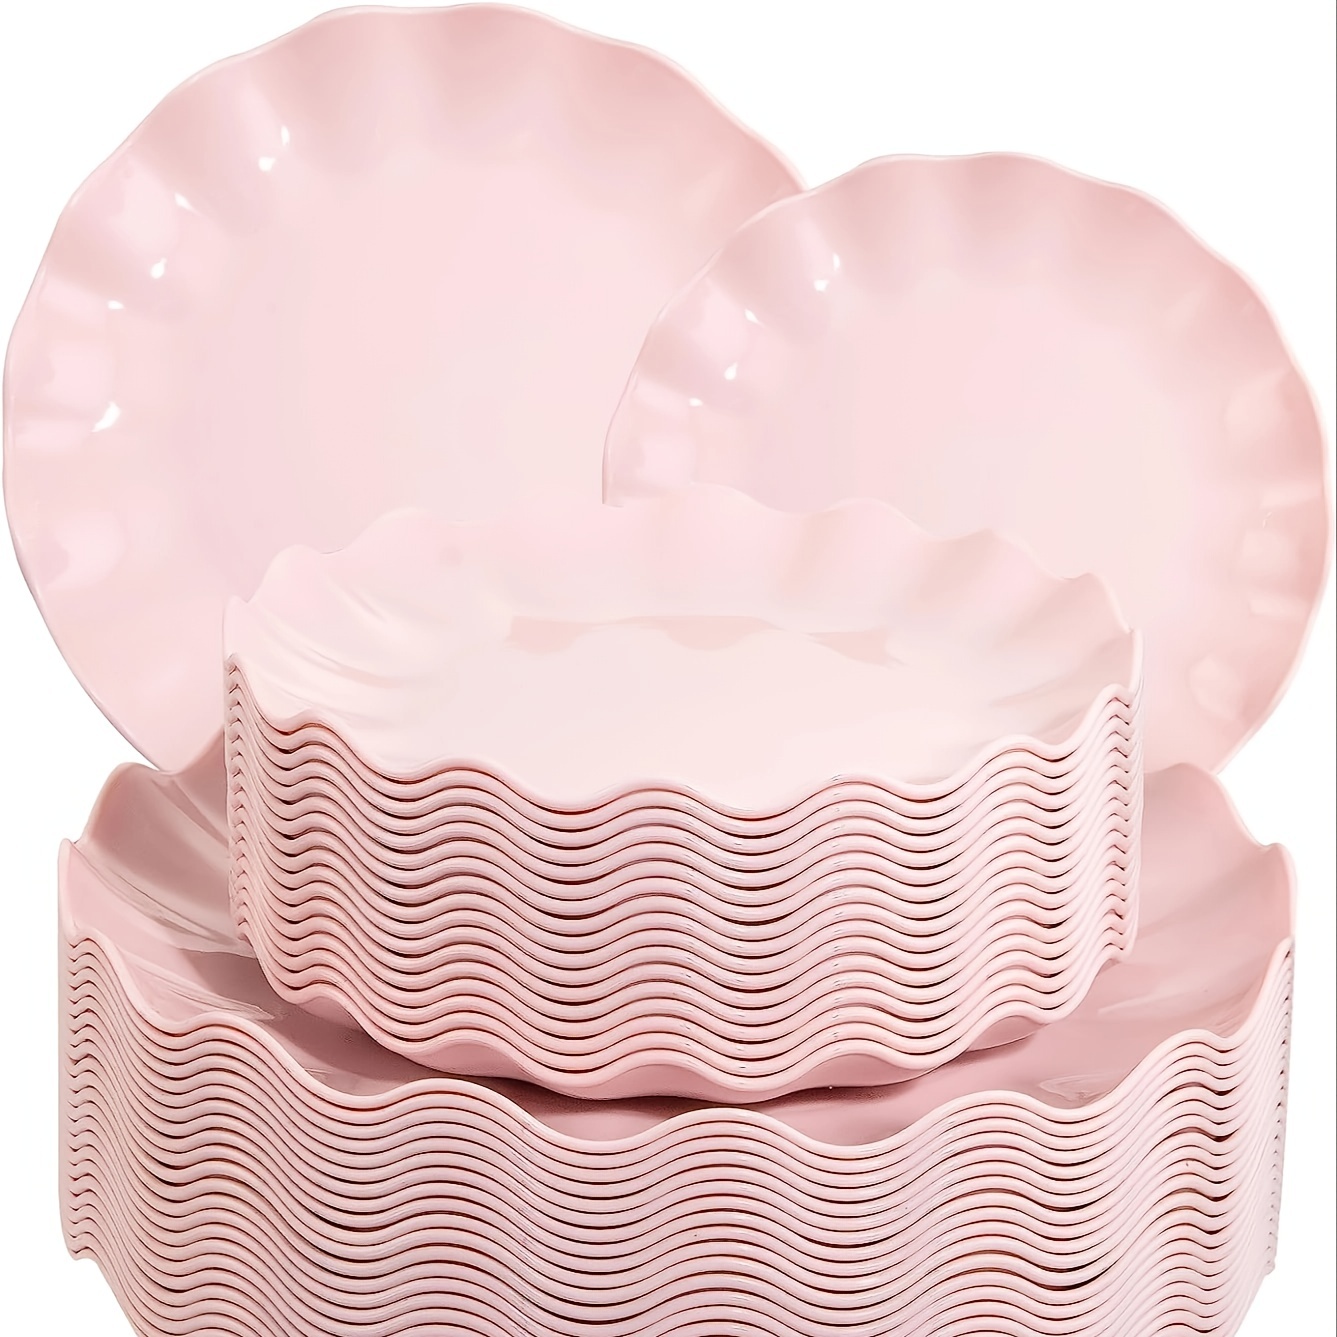 

Set Of 24 Pink Plates, Reusable Dinner Plates Durable And Microwave Dishwasher Safe, Dish For Parties, Light Weight Plates For Wedding Party Birthday Indoor Outdoor